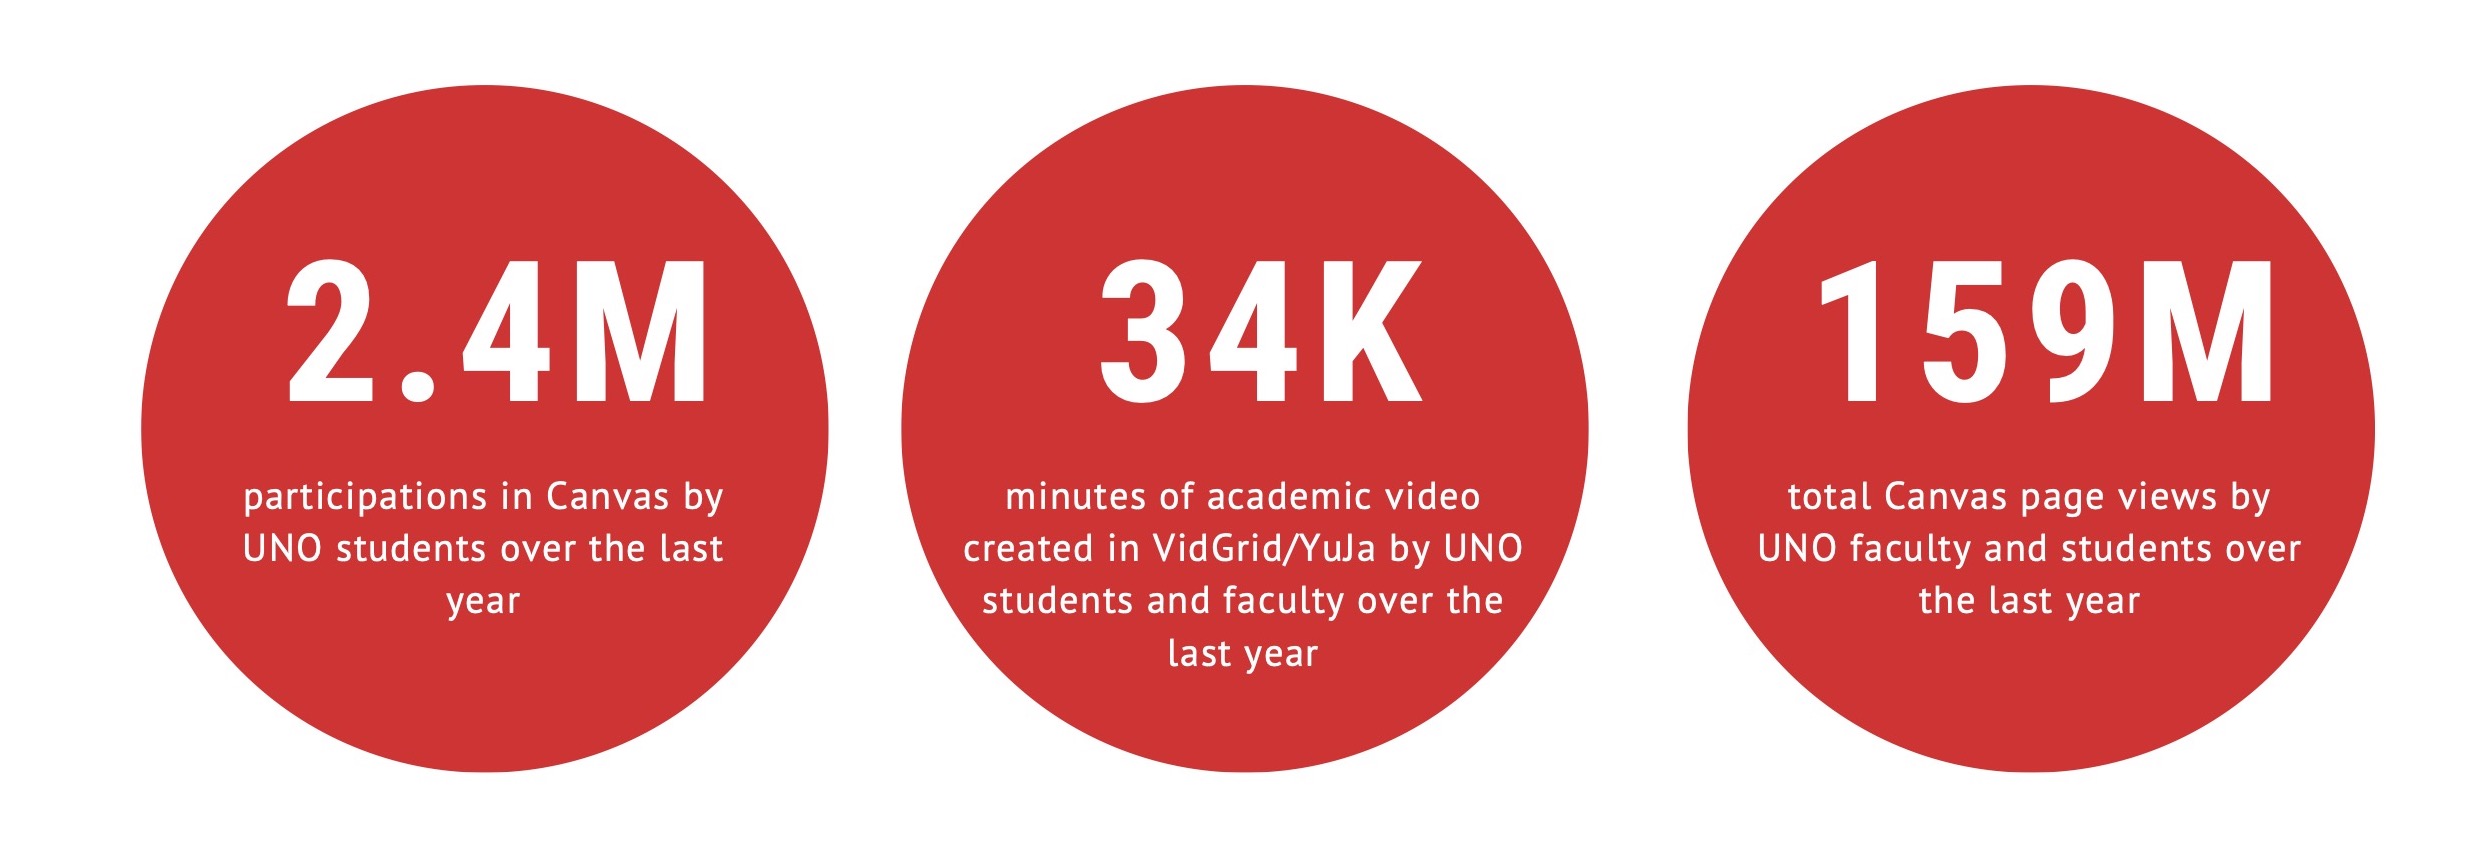 2.4 mil participations in Canvas by UNO students, 34 thousand minutes of videos created, 159 Mil total Canvas page views by faculty and students